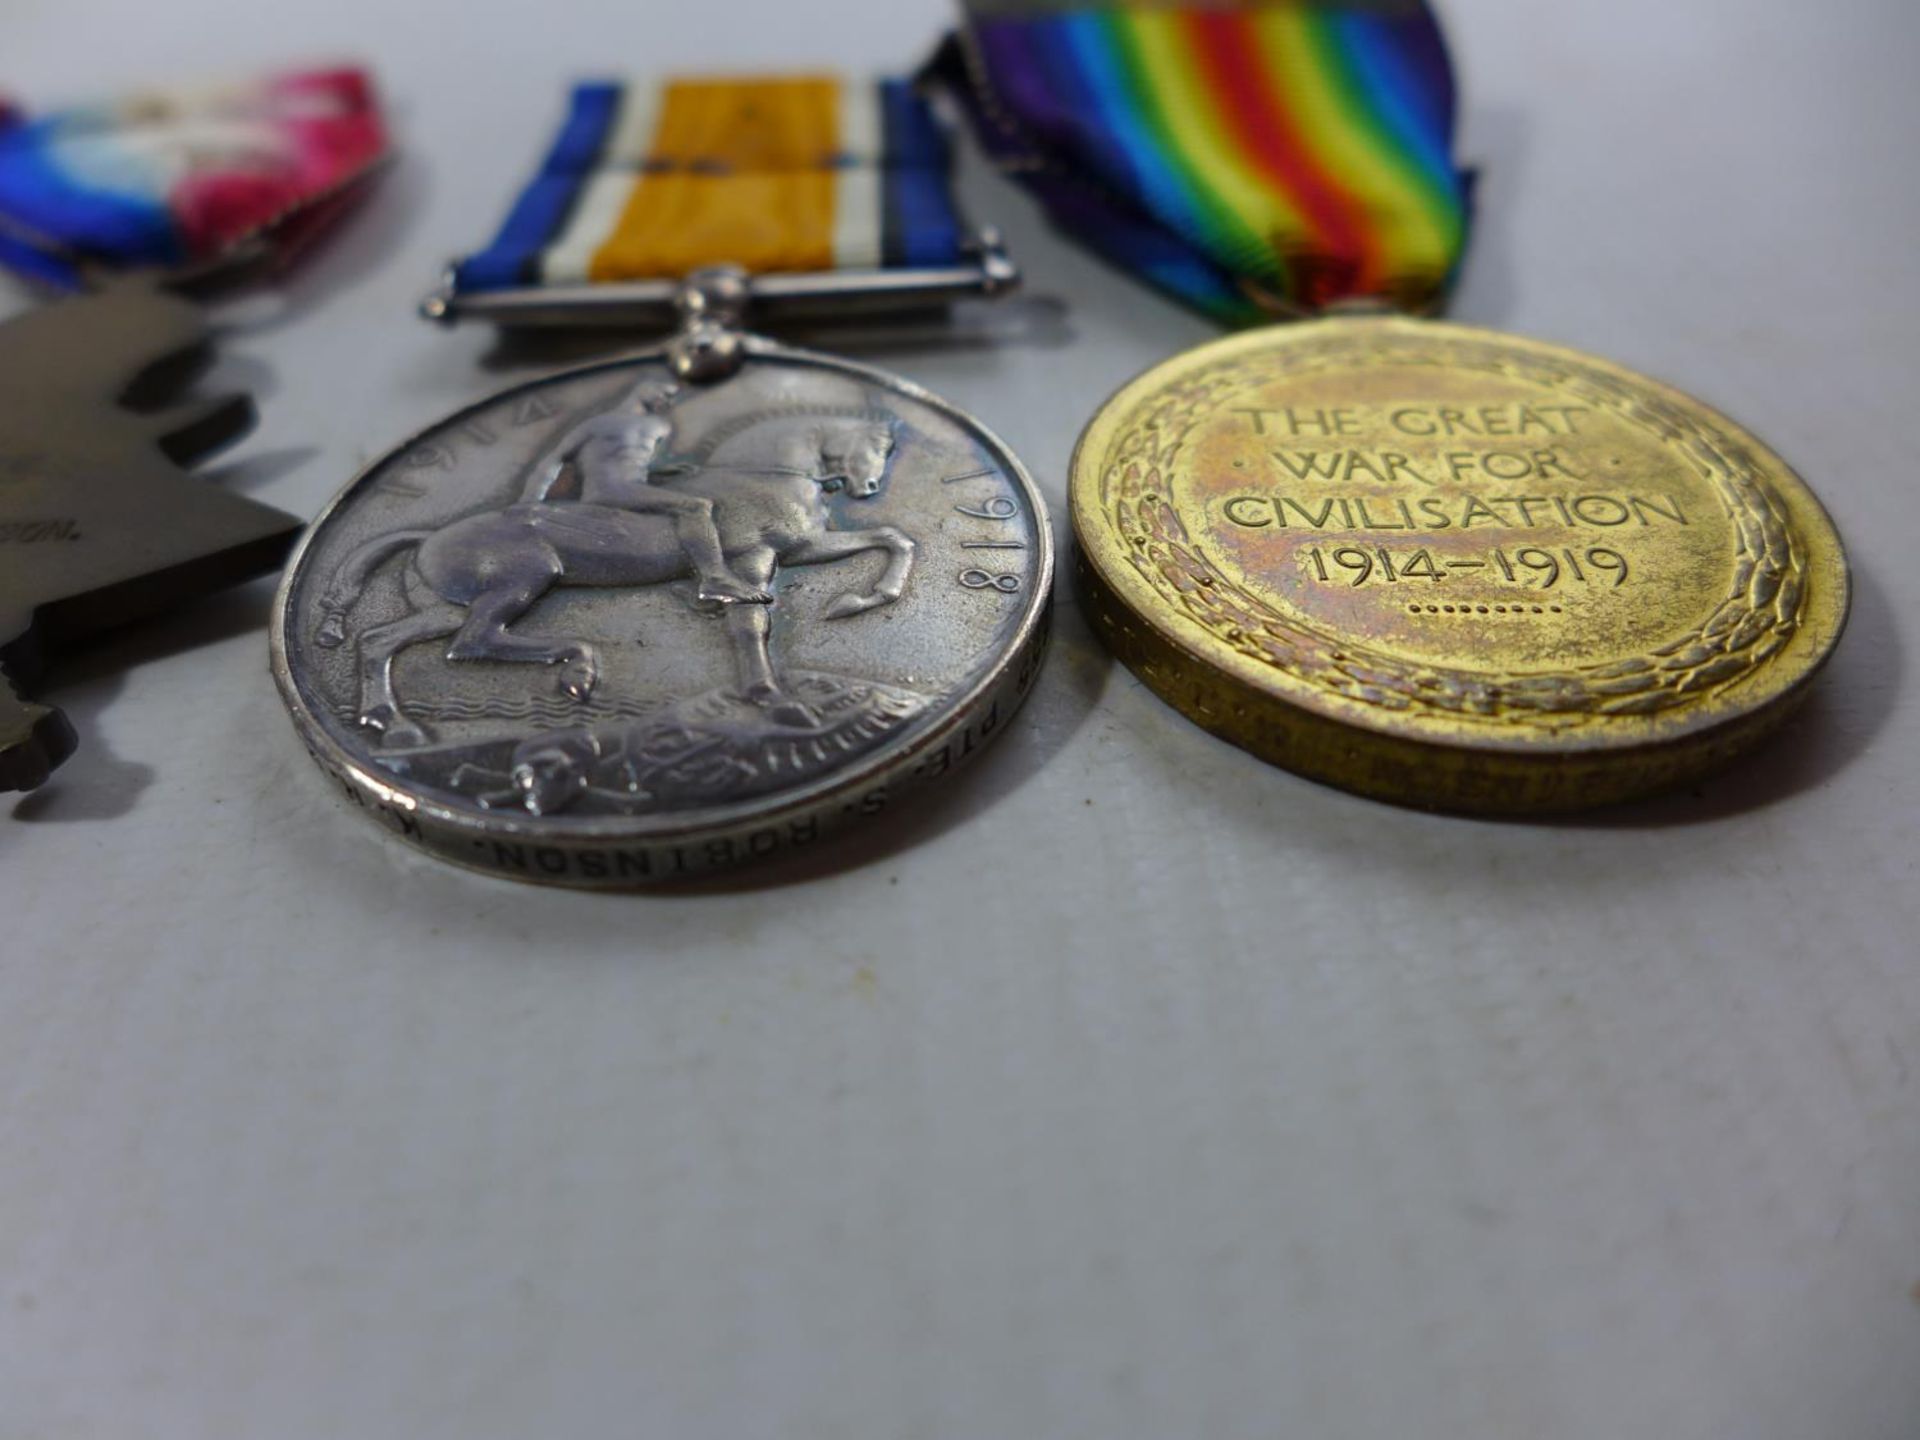 A BOER WAR AND WORLD WAR I CASUALTY MEDAL GROUP AWARDED TO 1653 PRIVATE SIMEON ROBINSON OF THE KINGS - Image 5 of 5